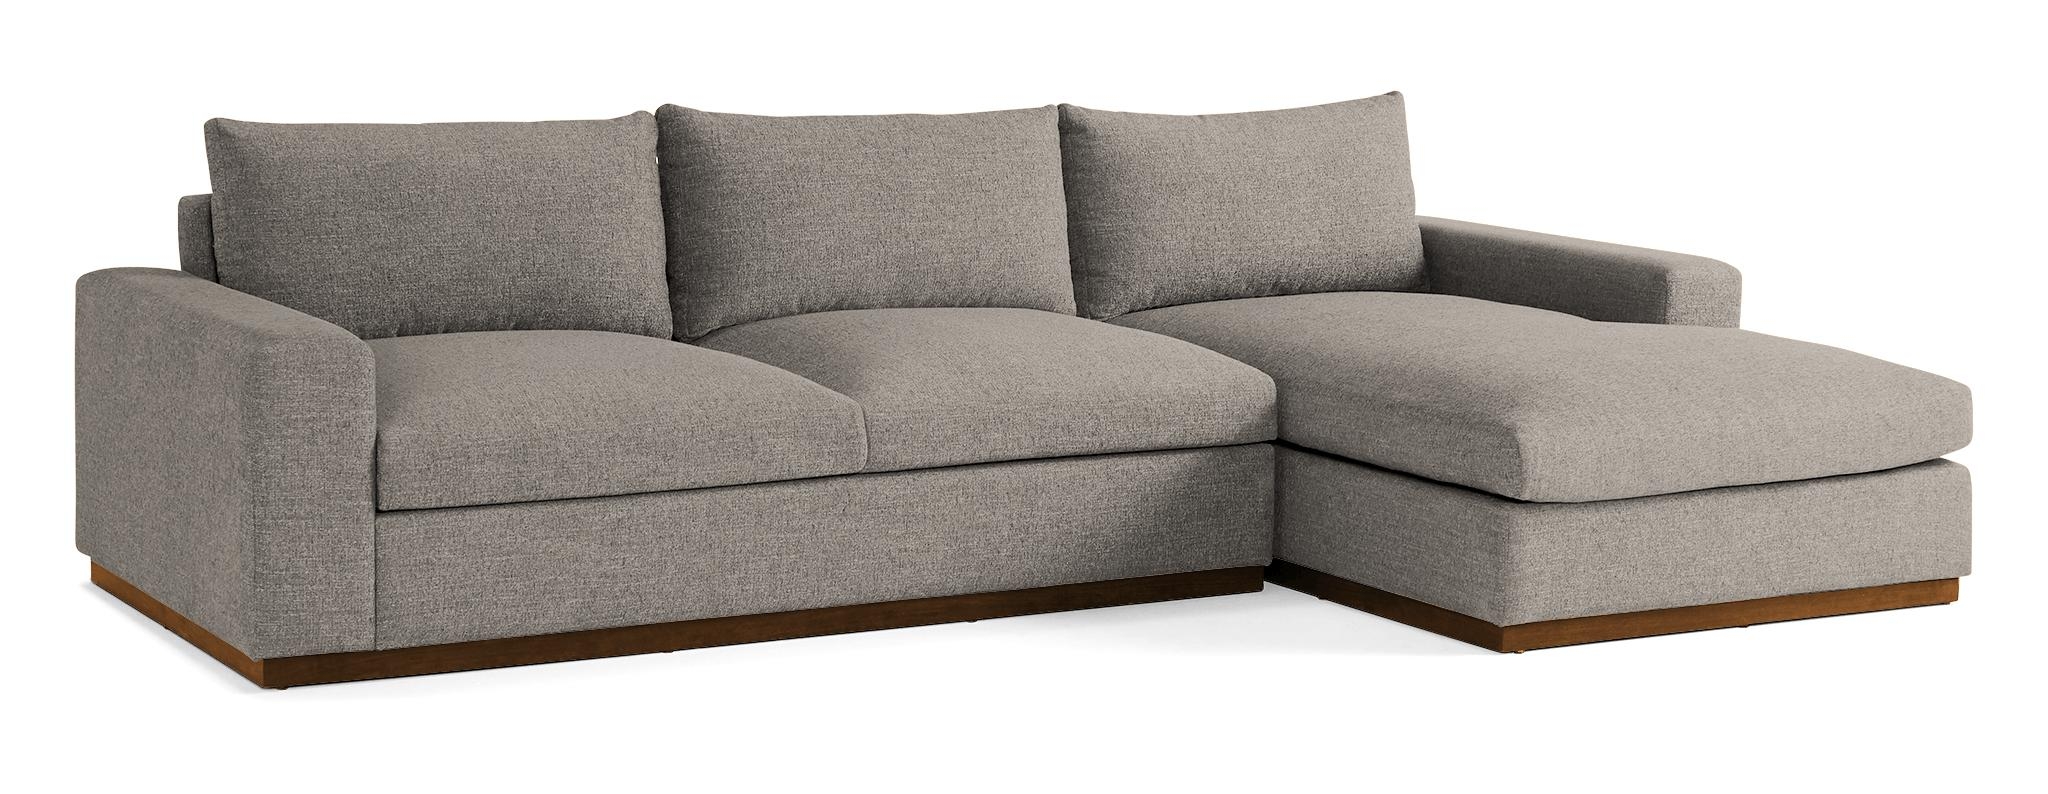 Beige/White Holt Mid Century Modern Sectional with Storage - Prime Stone - Mocha - Right - Image 1